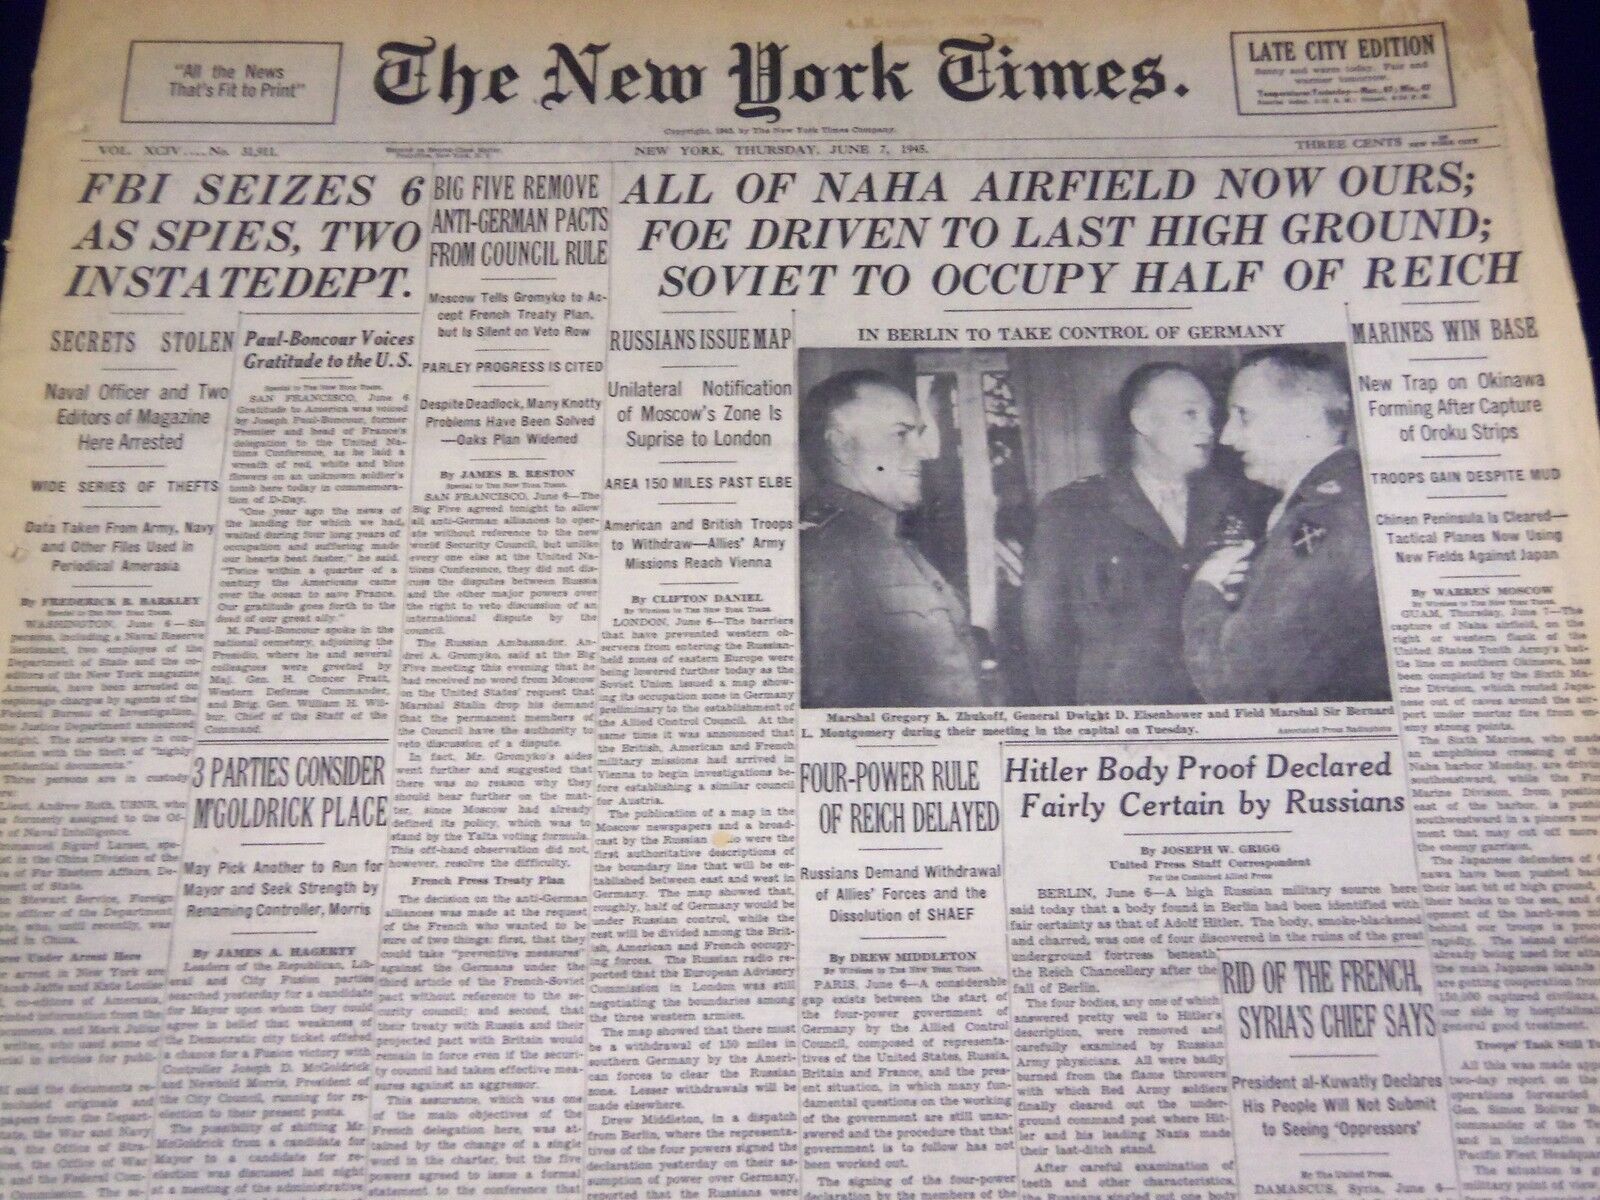 1945 JUNE 7 NEW YORK TIMES - F. B. I. SEIZES 6 AS SPIES, 2 IN STATE DEPT- NT 640